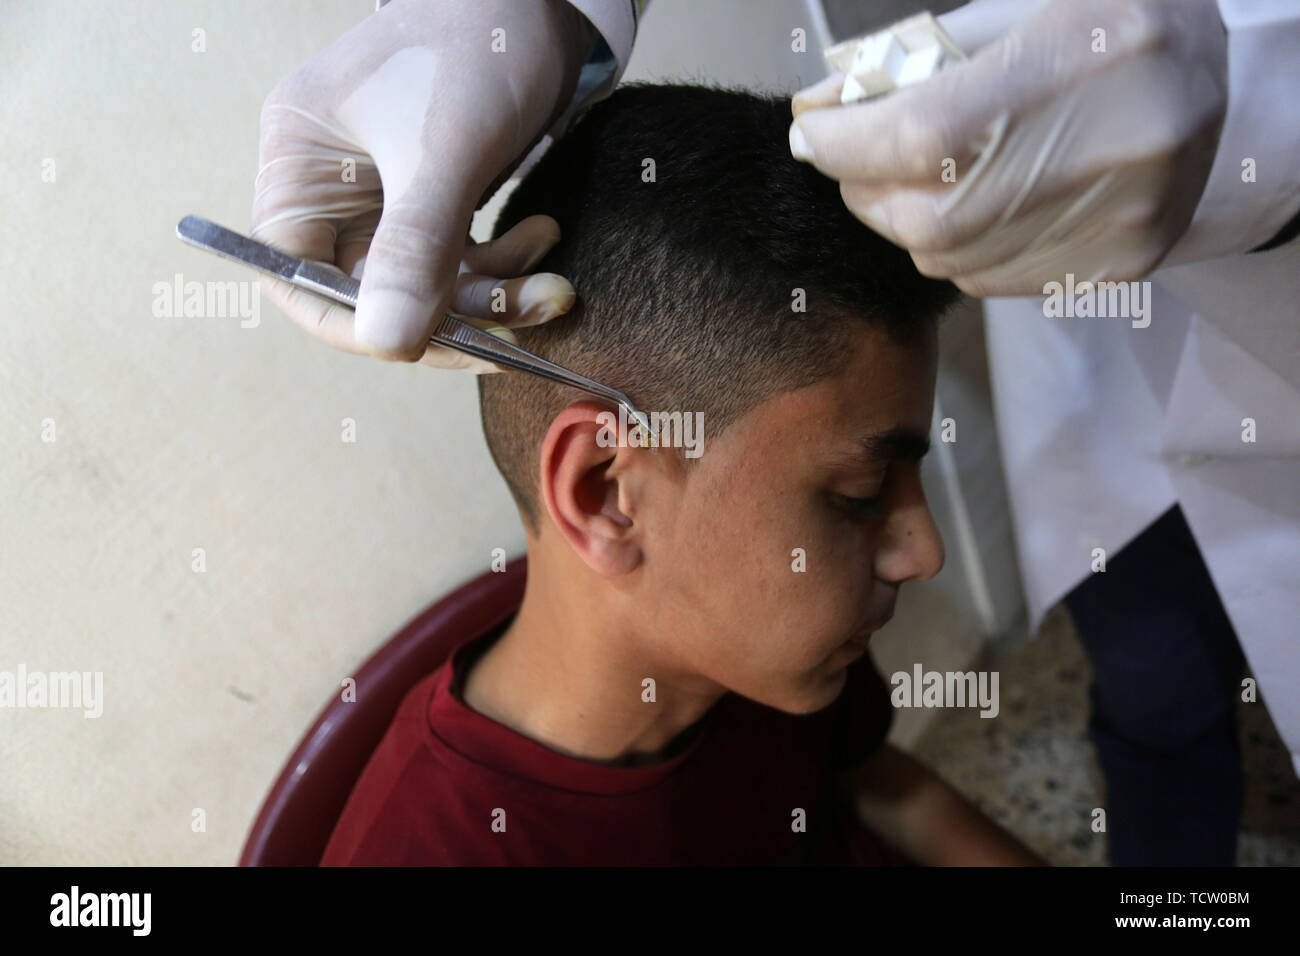 June 10, 2019 - Gaza City, Gaza Strip, Palestinian Territory - A Palestinian patient receives a bee-sting therapy by a health practitioner at a clinic in Gaza city on June 10, 2019. Apitherapy is the use of substances from honeybees, such as honey, propolis, royal jelly, or even venom (extracted or from live bees), to relieve various medical conditions. Most claims of apitherapy the medical use of bee venom are anecdotal and have not been proved to the satisfaction of scientists, although believers say it helps relieve pain from multiple sclerosis and rheumatoid arthritis and certain other ail Stock Photo